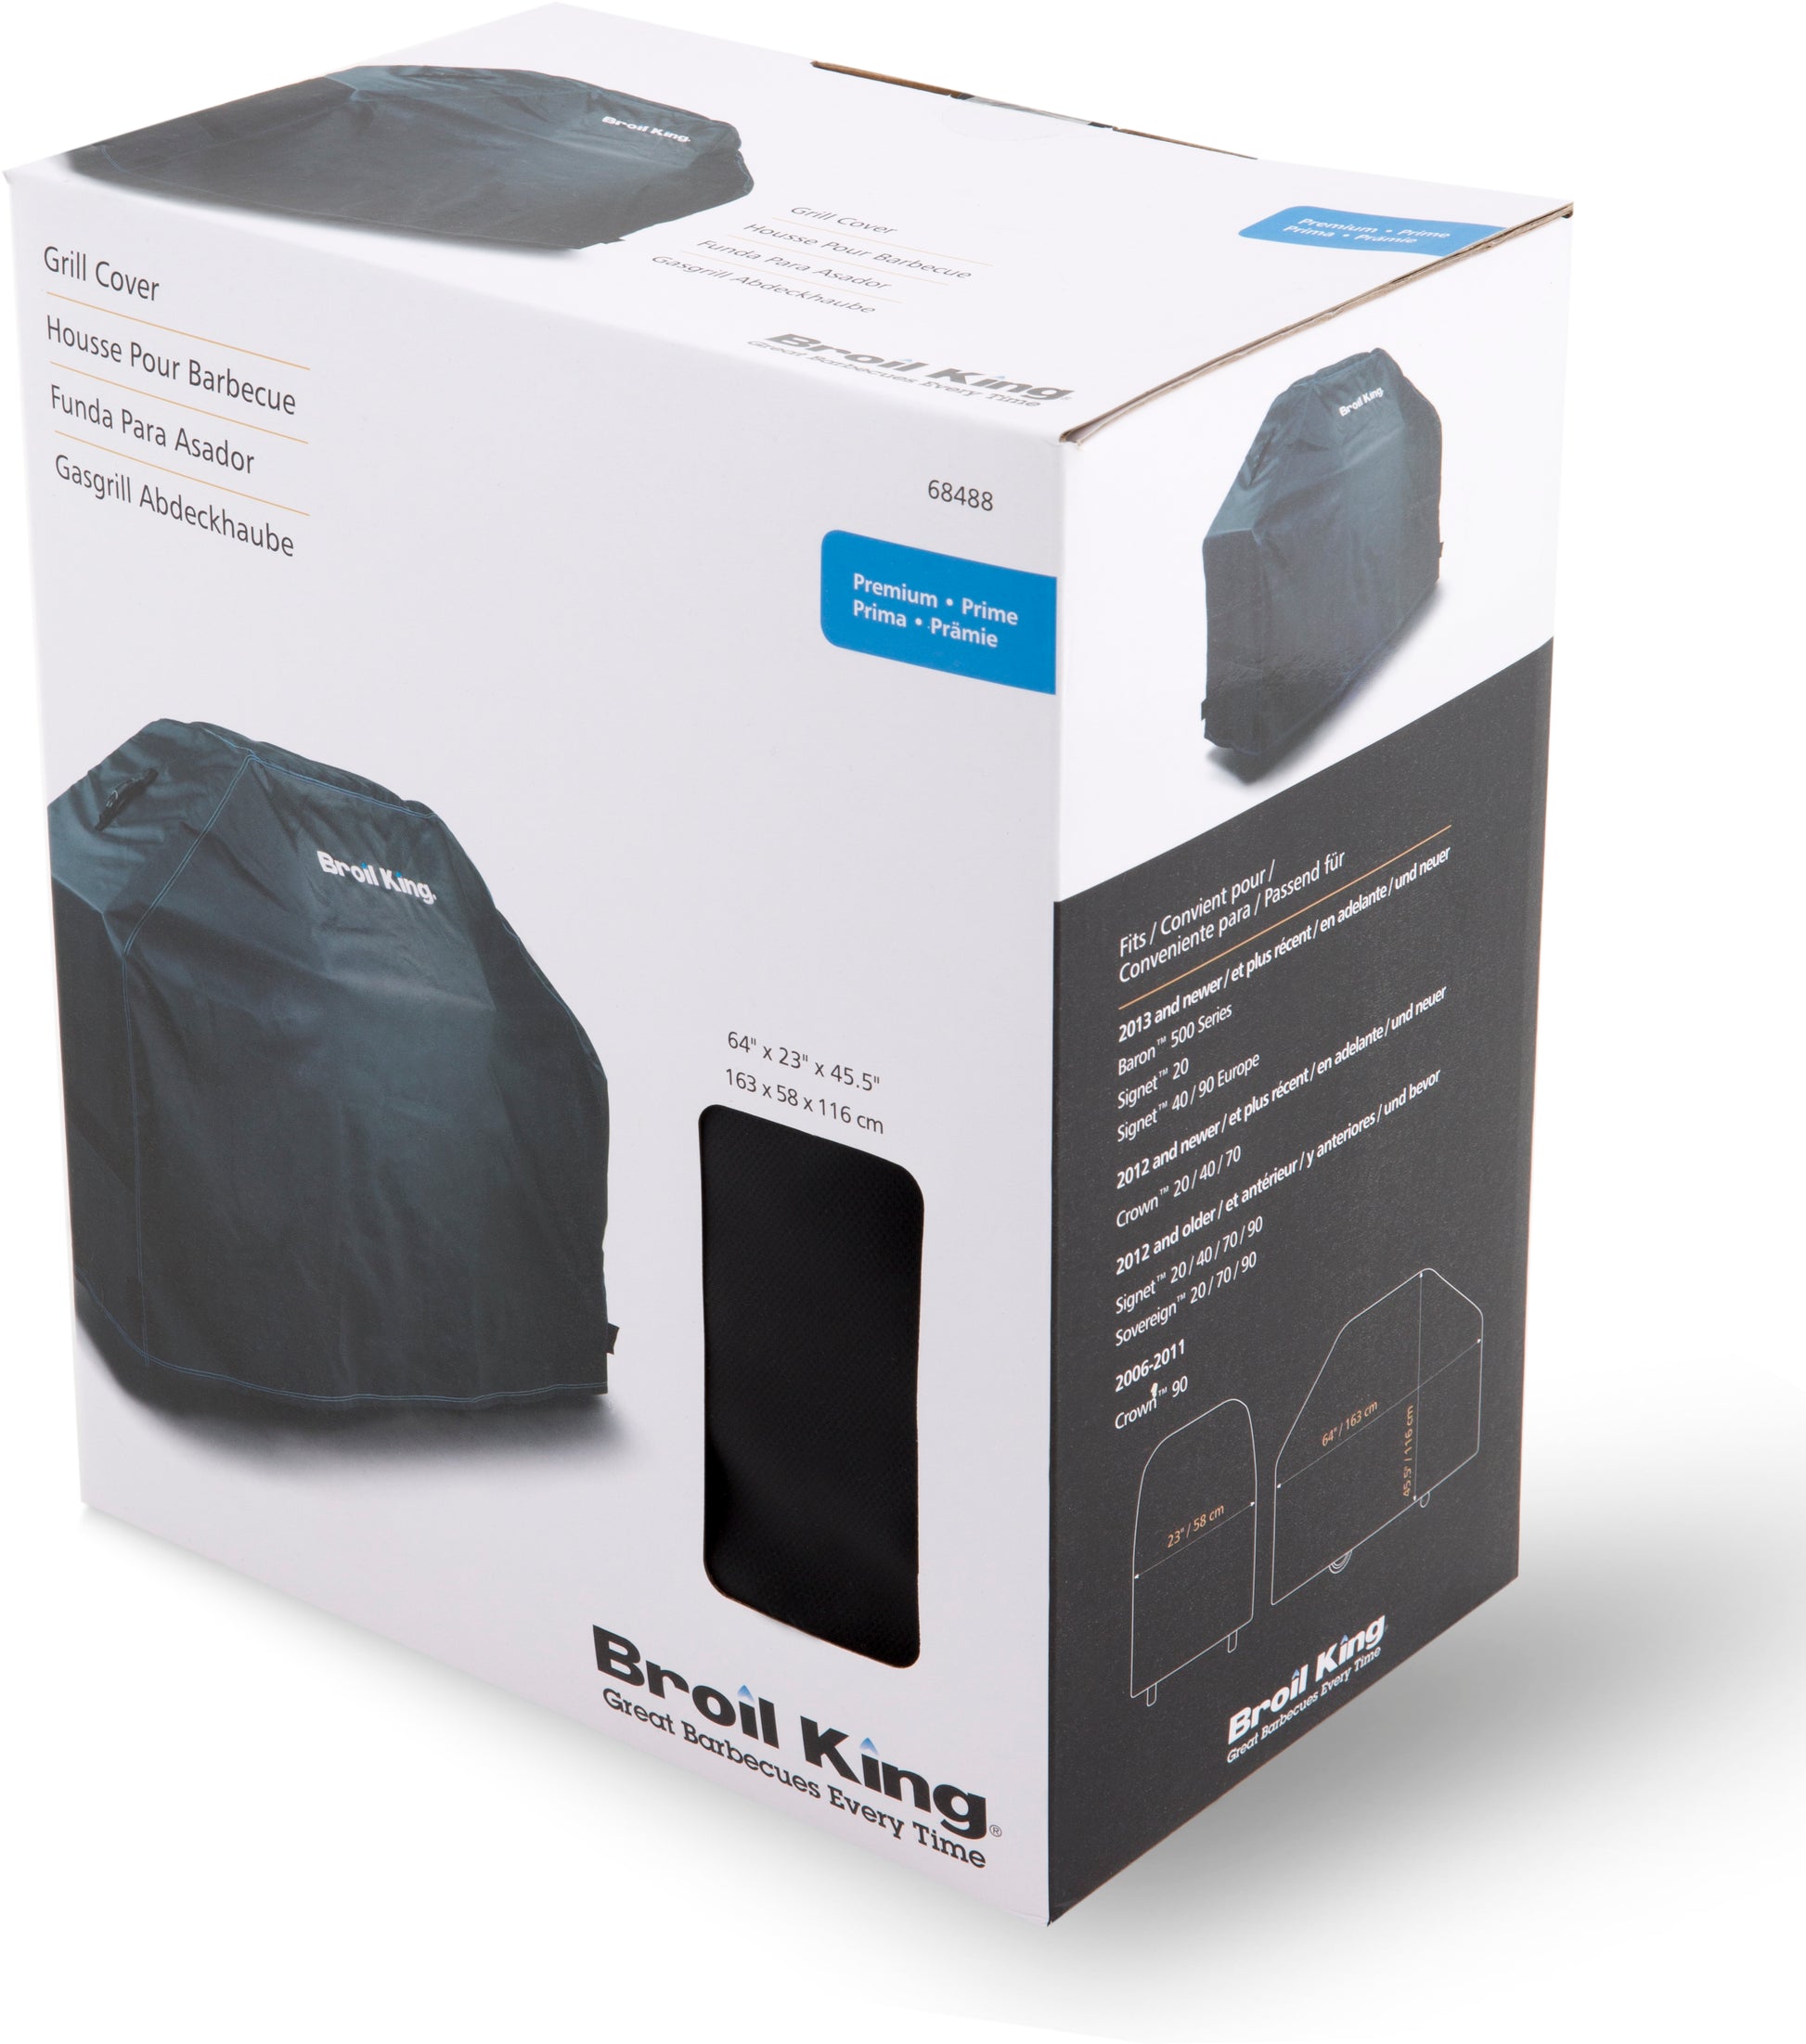 Broil King BBQ Cover - Baron 500 Series